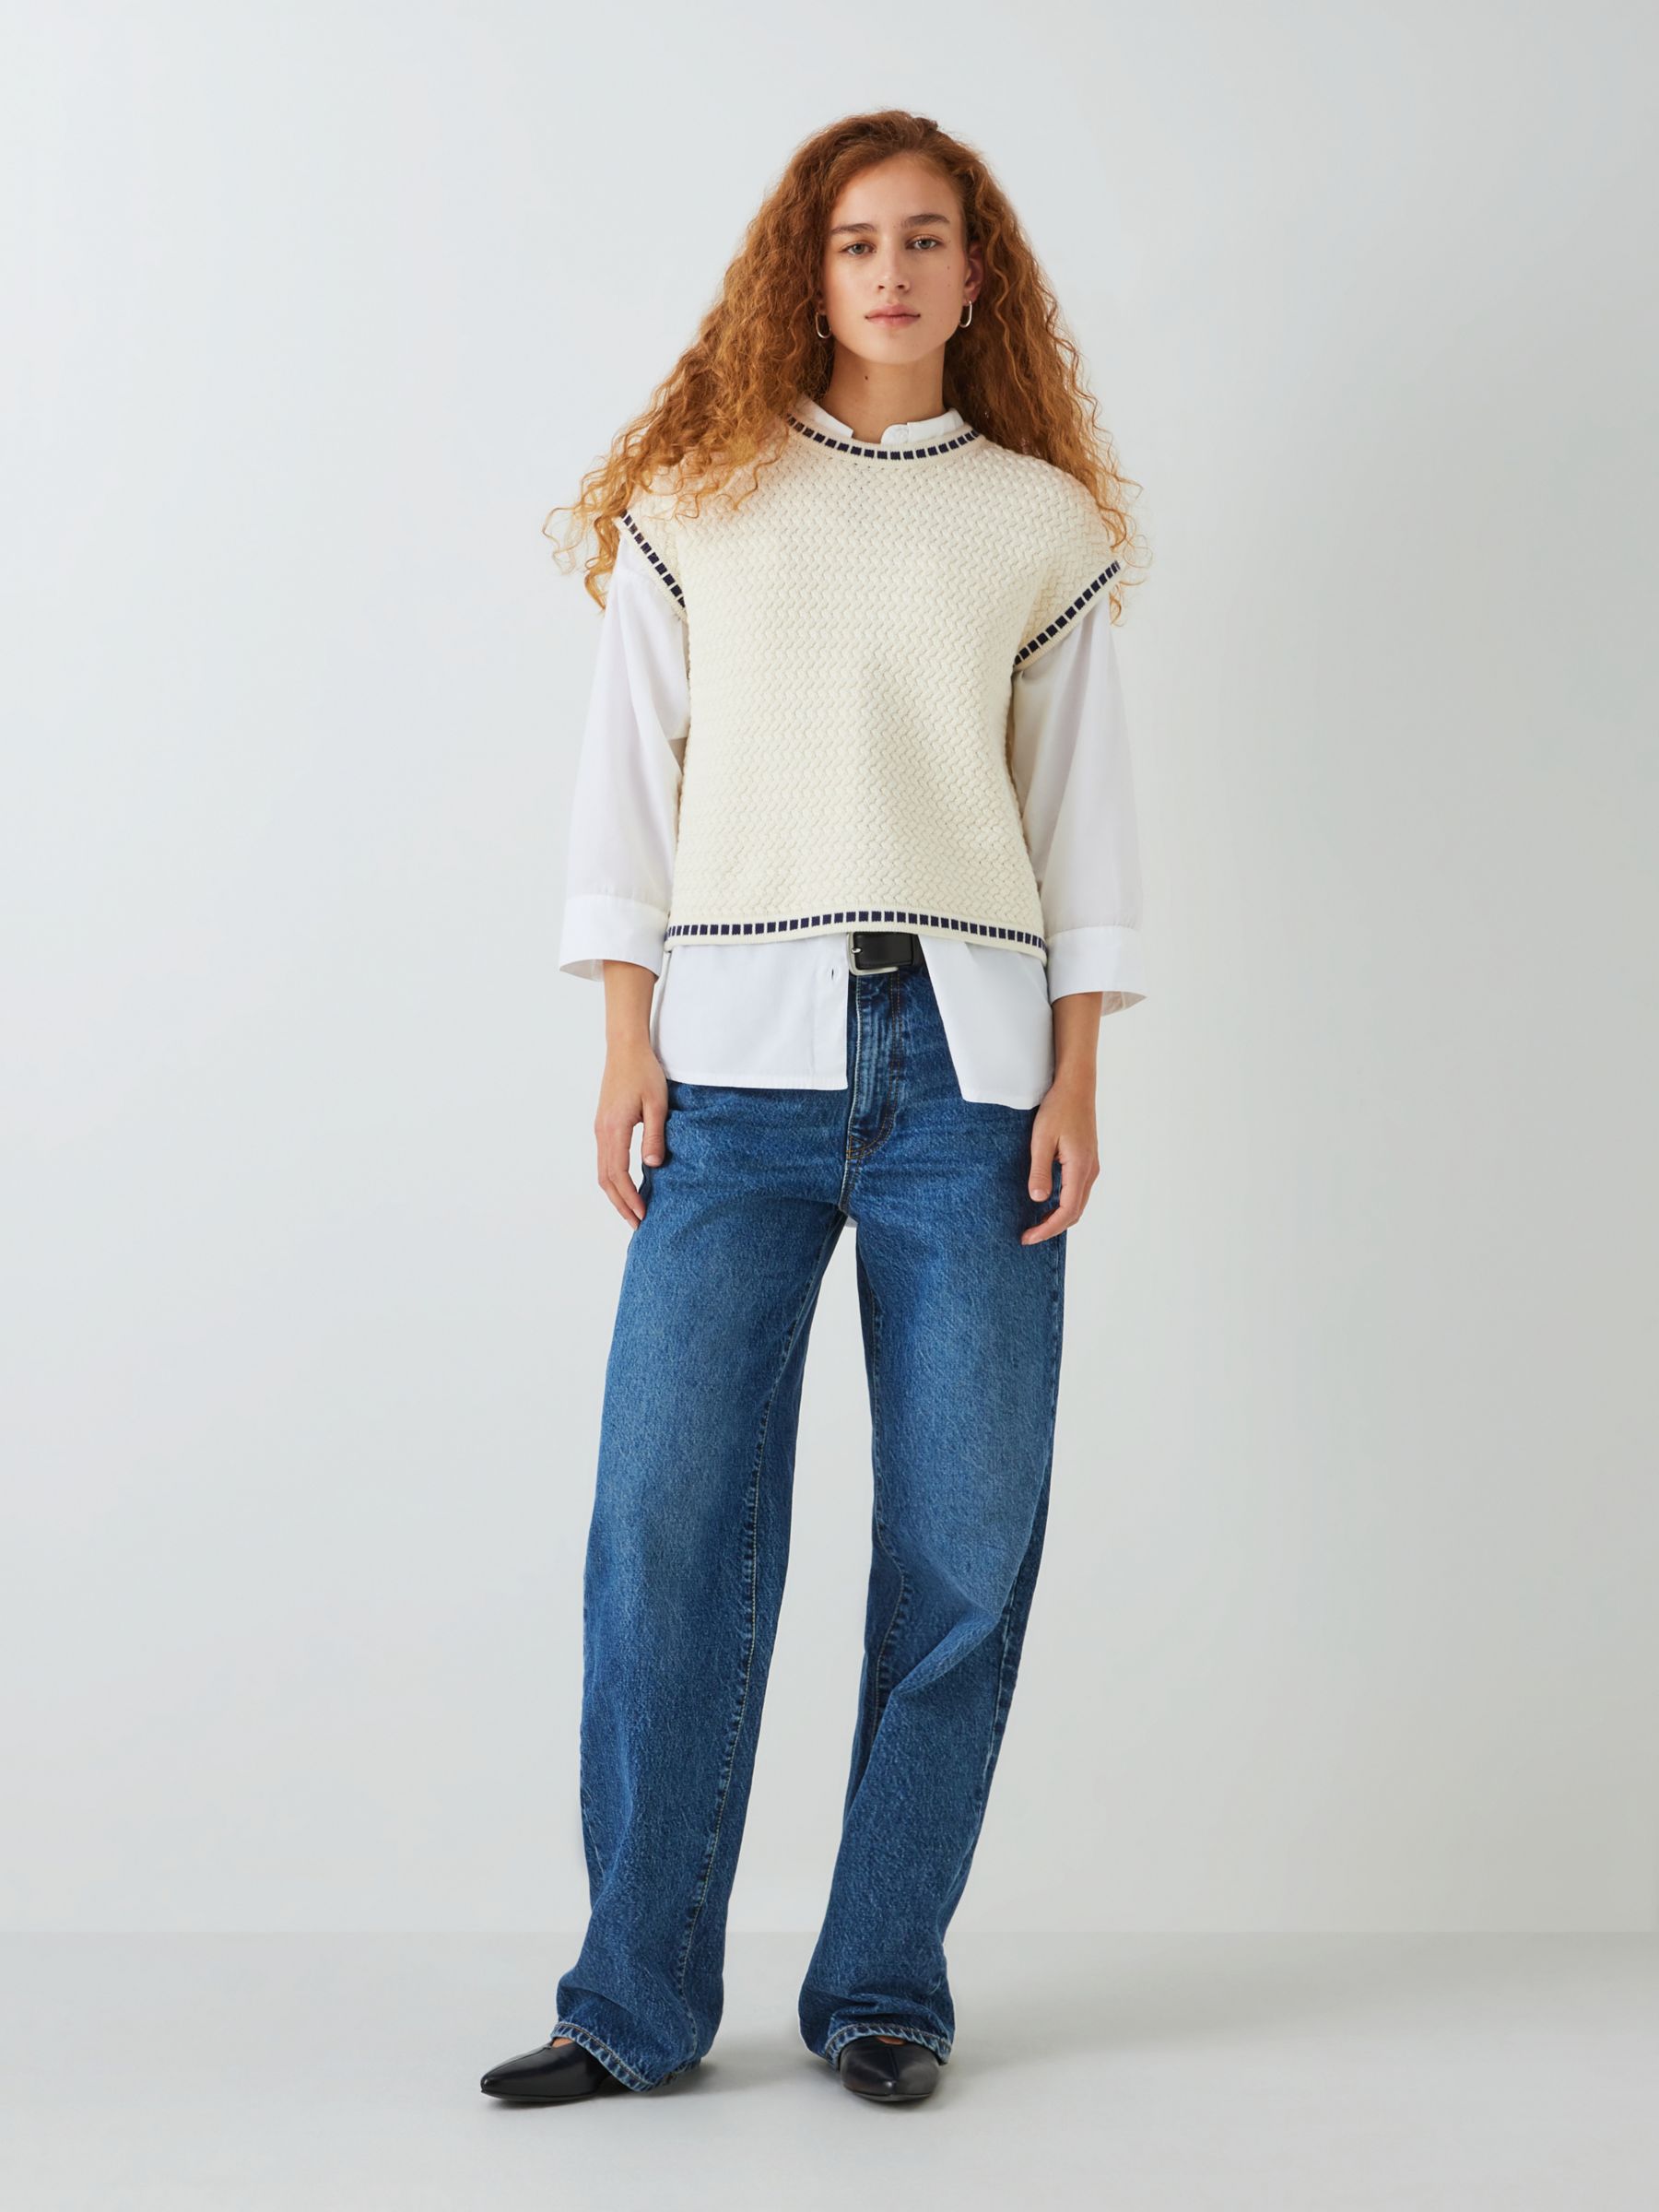 Buy John Lewis ANYDAY Textured Stitch Knit Tank Top, Ivory/Navy Online at johnlewis.com